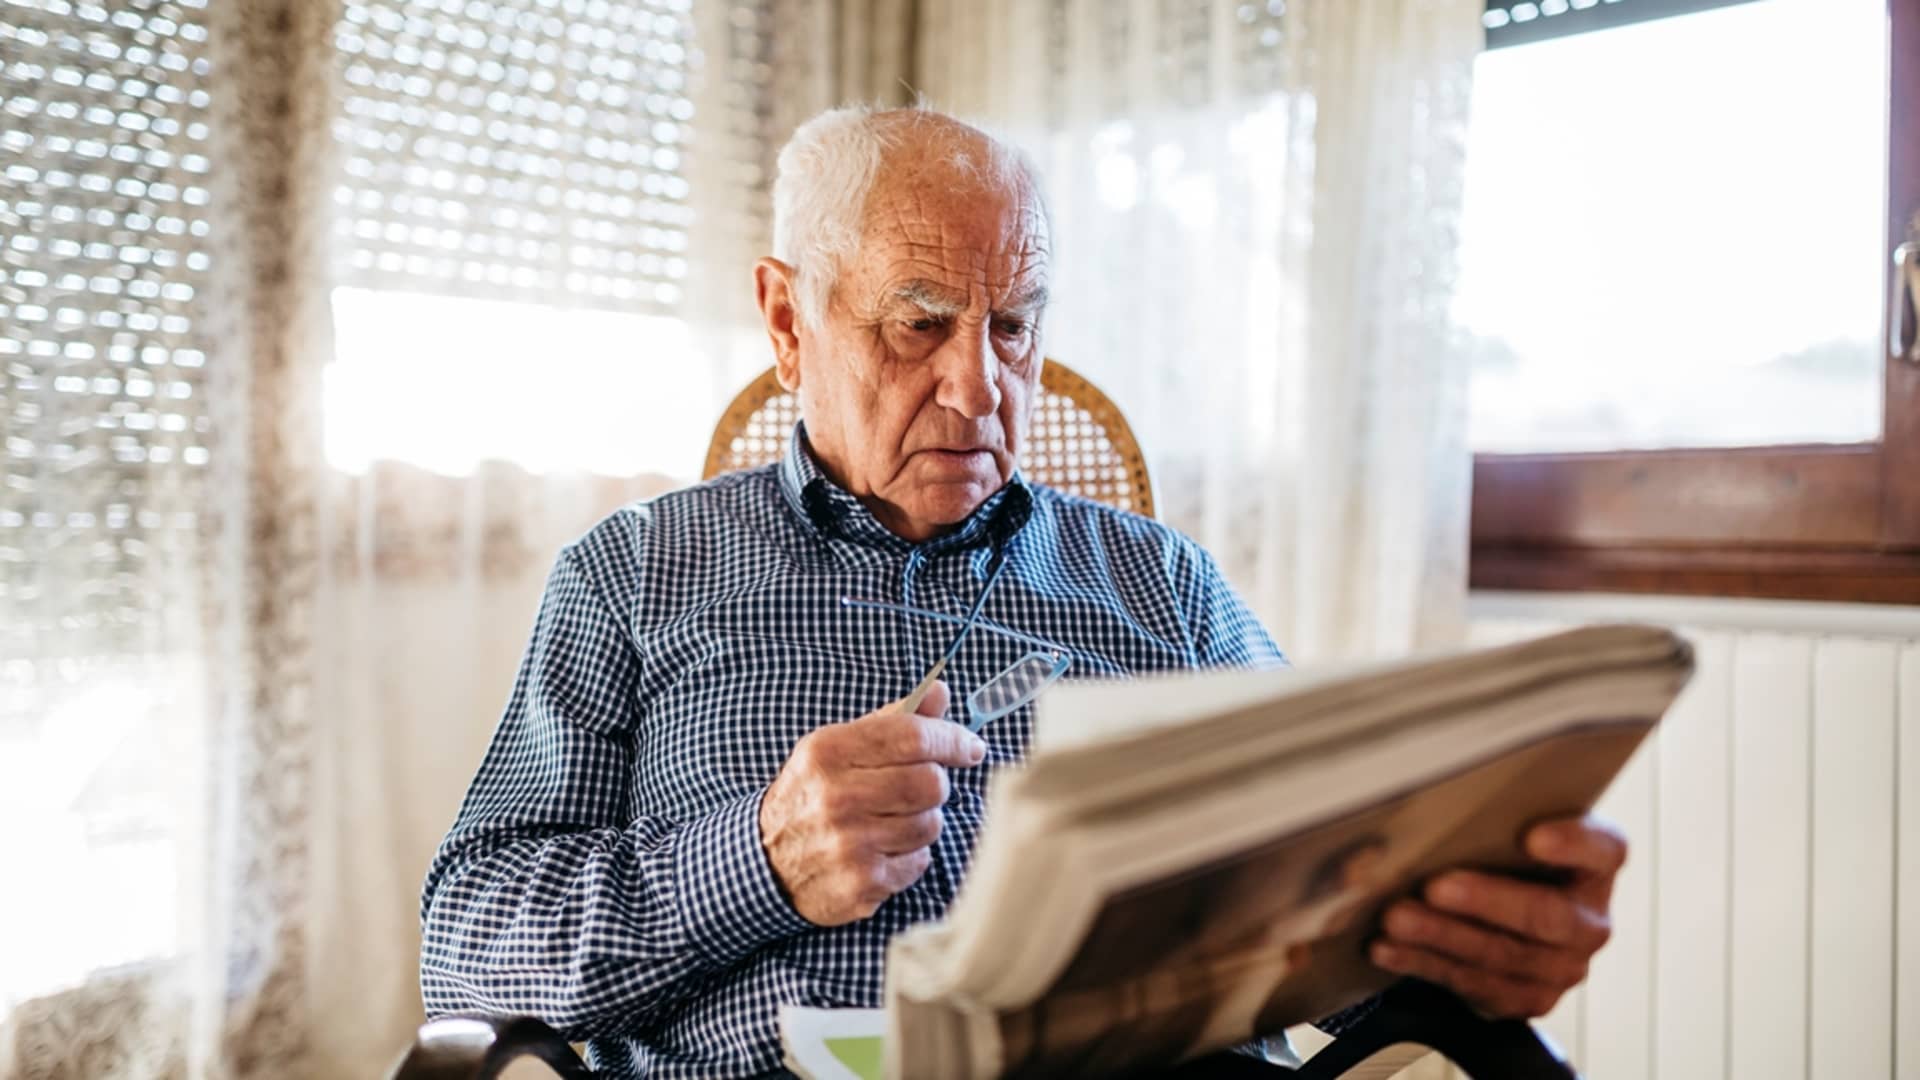 Another record-high Social Security cost-of-living adjustment in 2023 could put more money in retirees’ wallets and impact the program’s funds